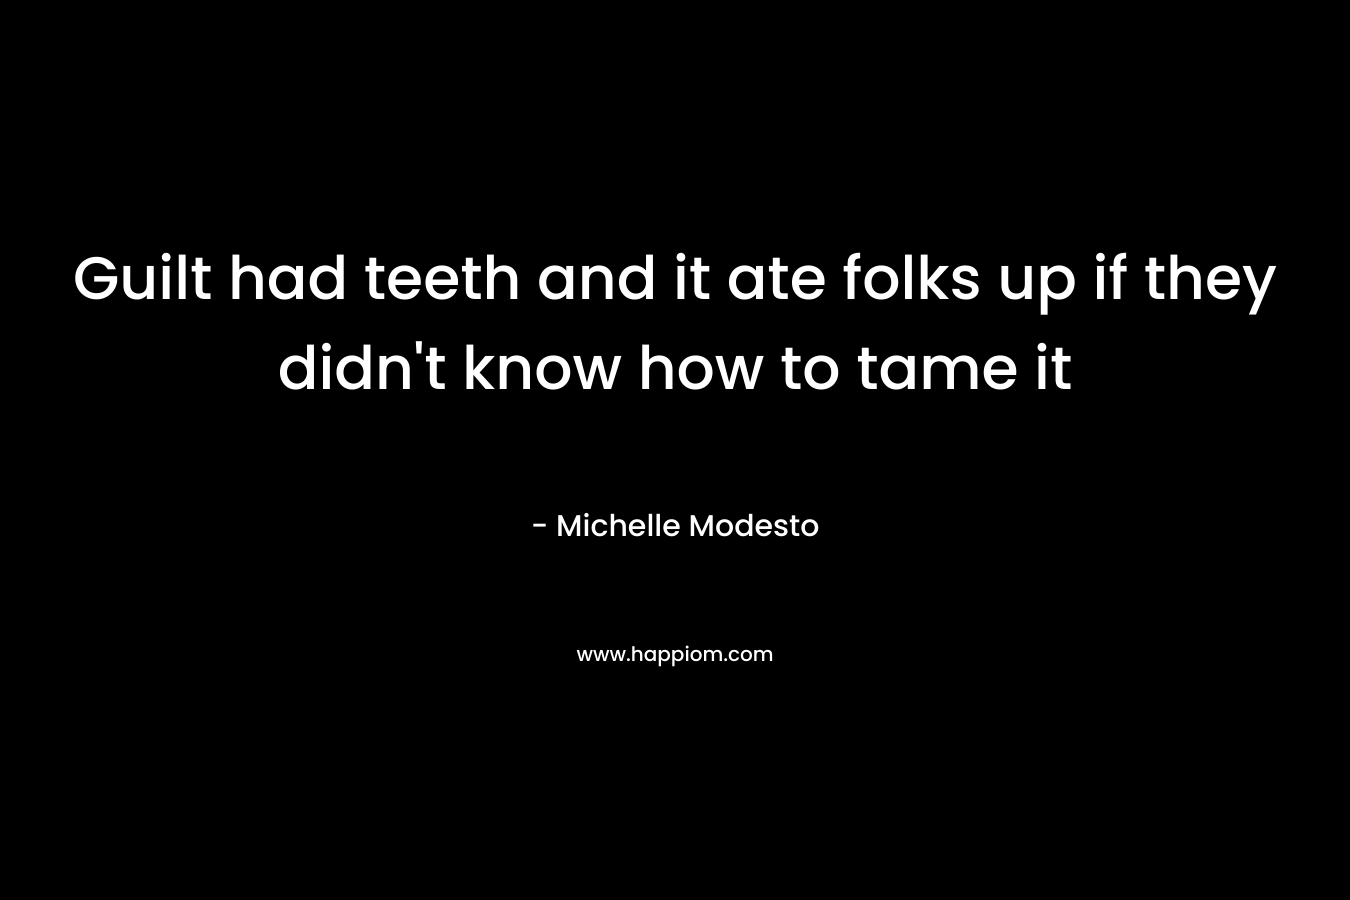 Guilt had teeth and it ate folks up if they didn’t know how to tame it – Michelle Modesto